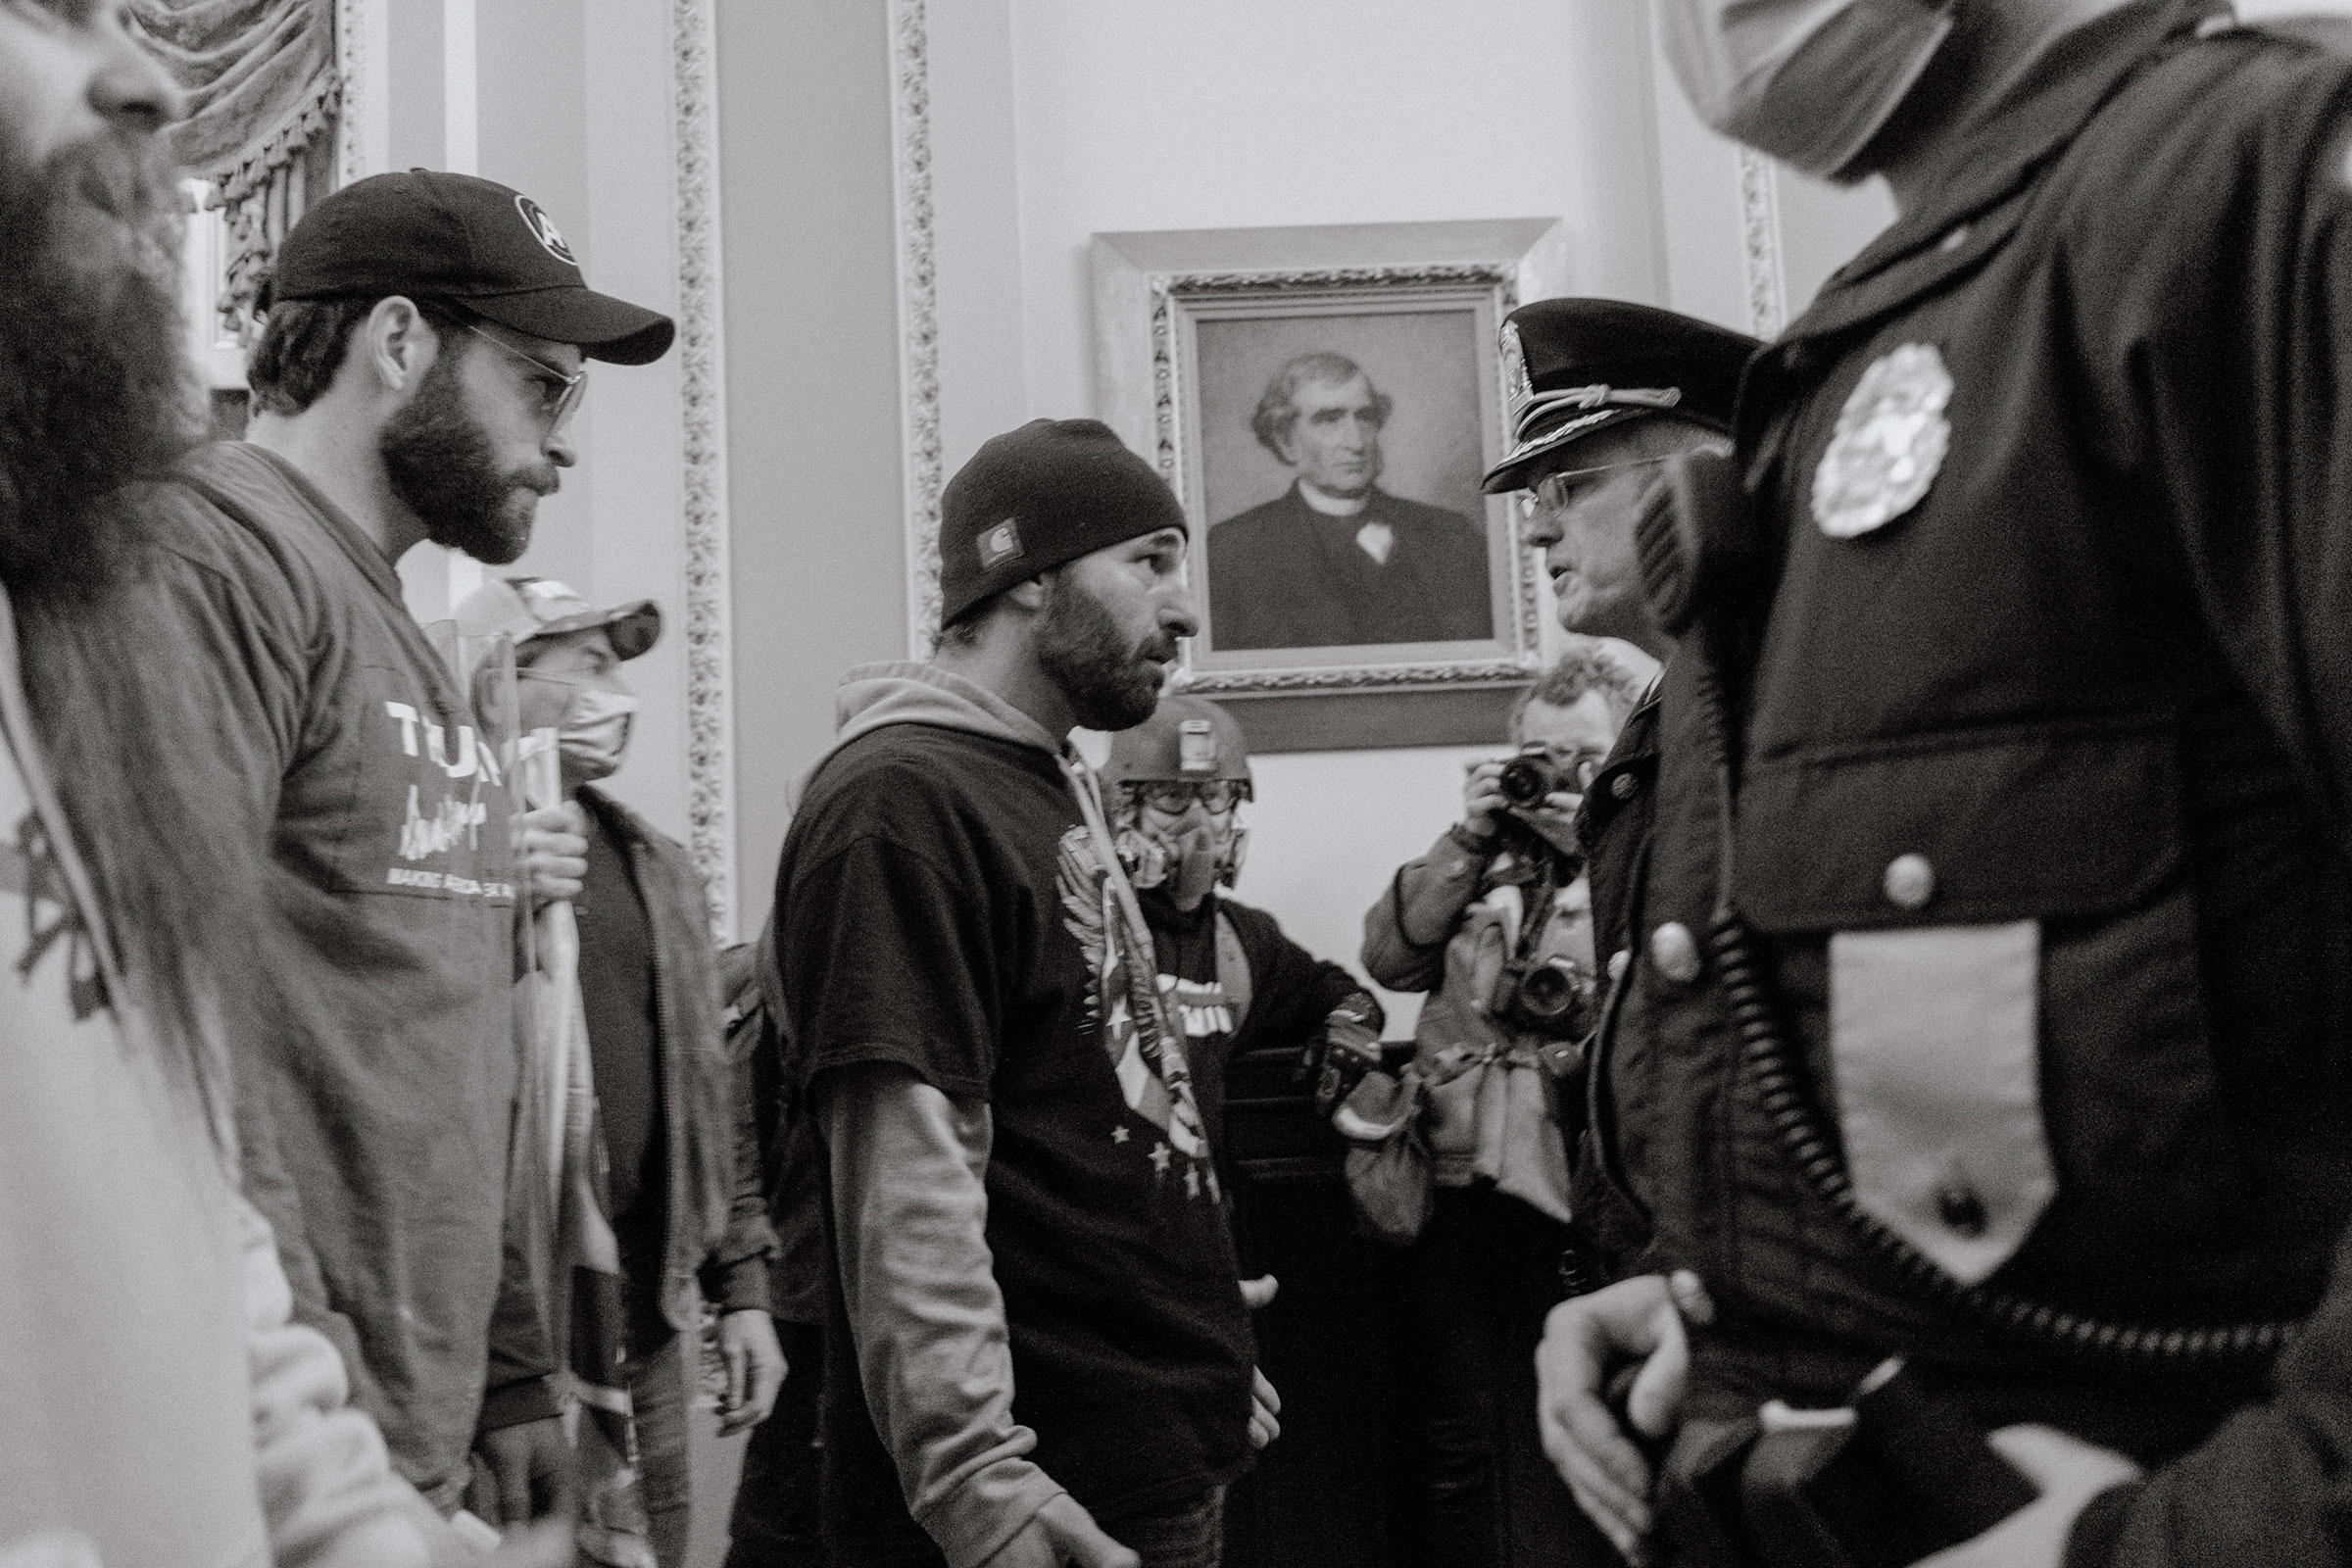 Pro-Trump rioters confront Capitol Police officers after breaking into the Capitol. (Christopher Lee for TIME)